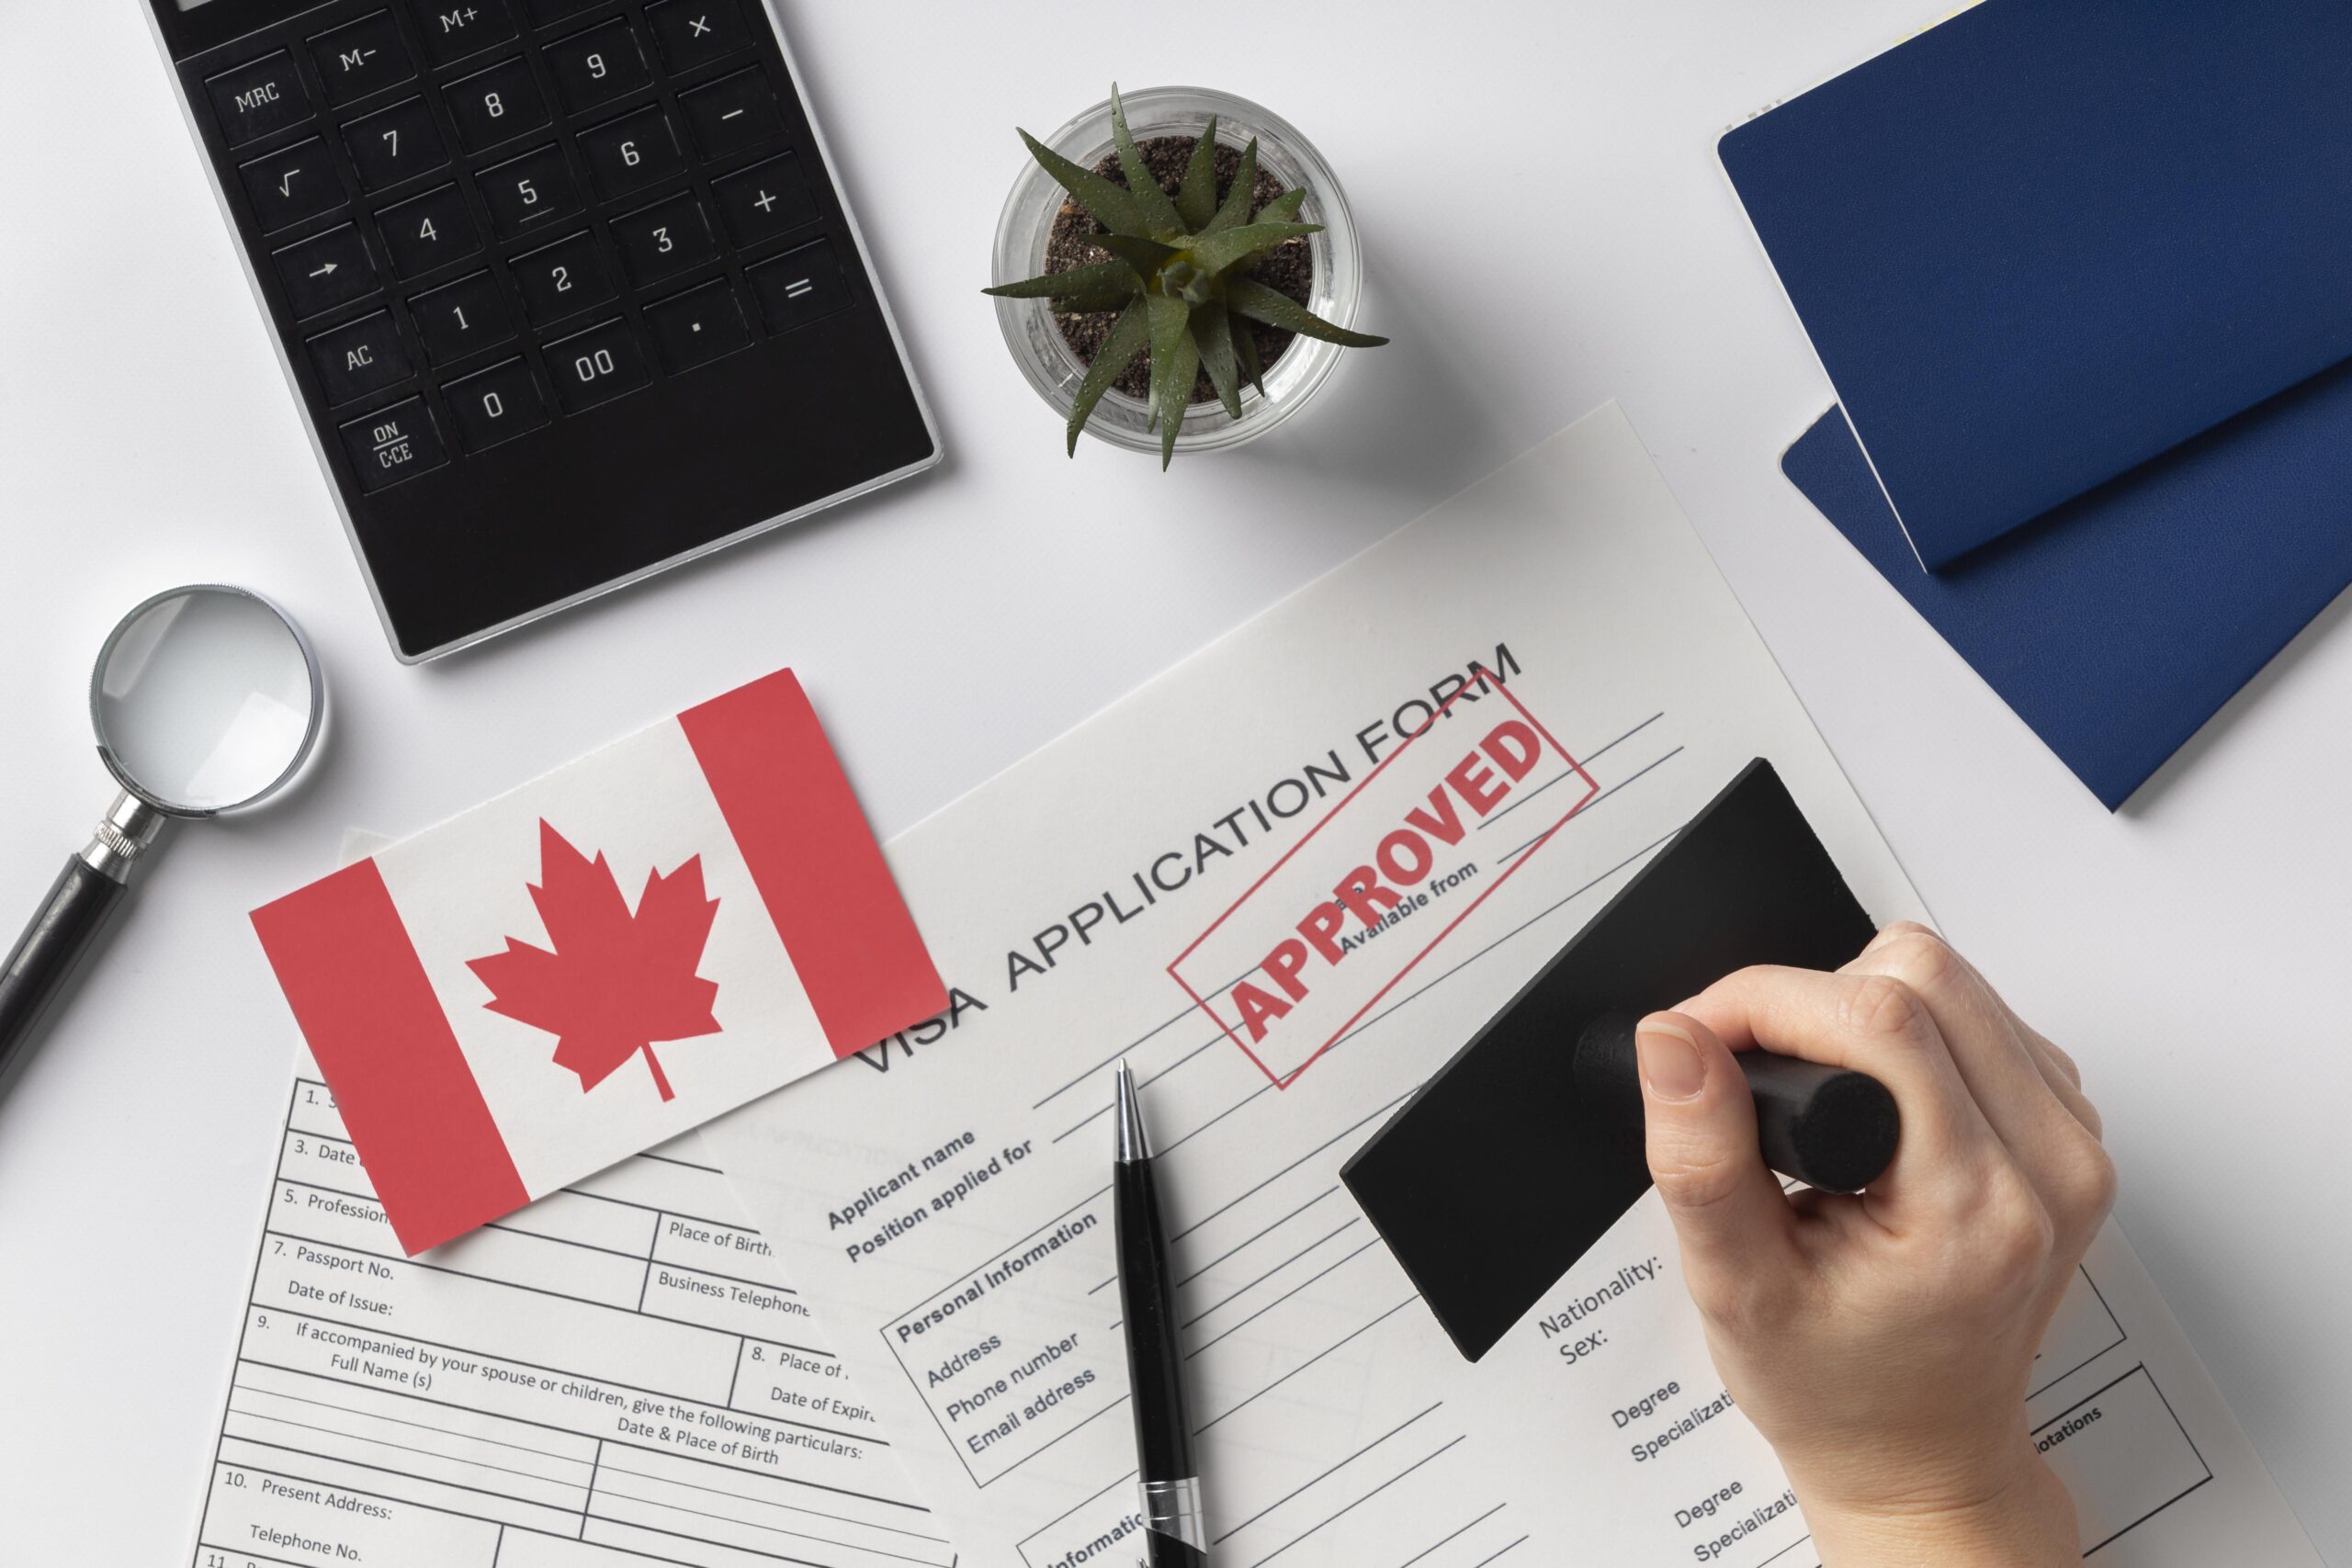 Explore Temporary Visa options with guidance from our Immigration Consultant team at MapleMate Immigration